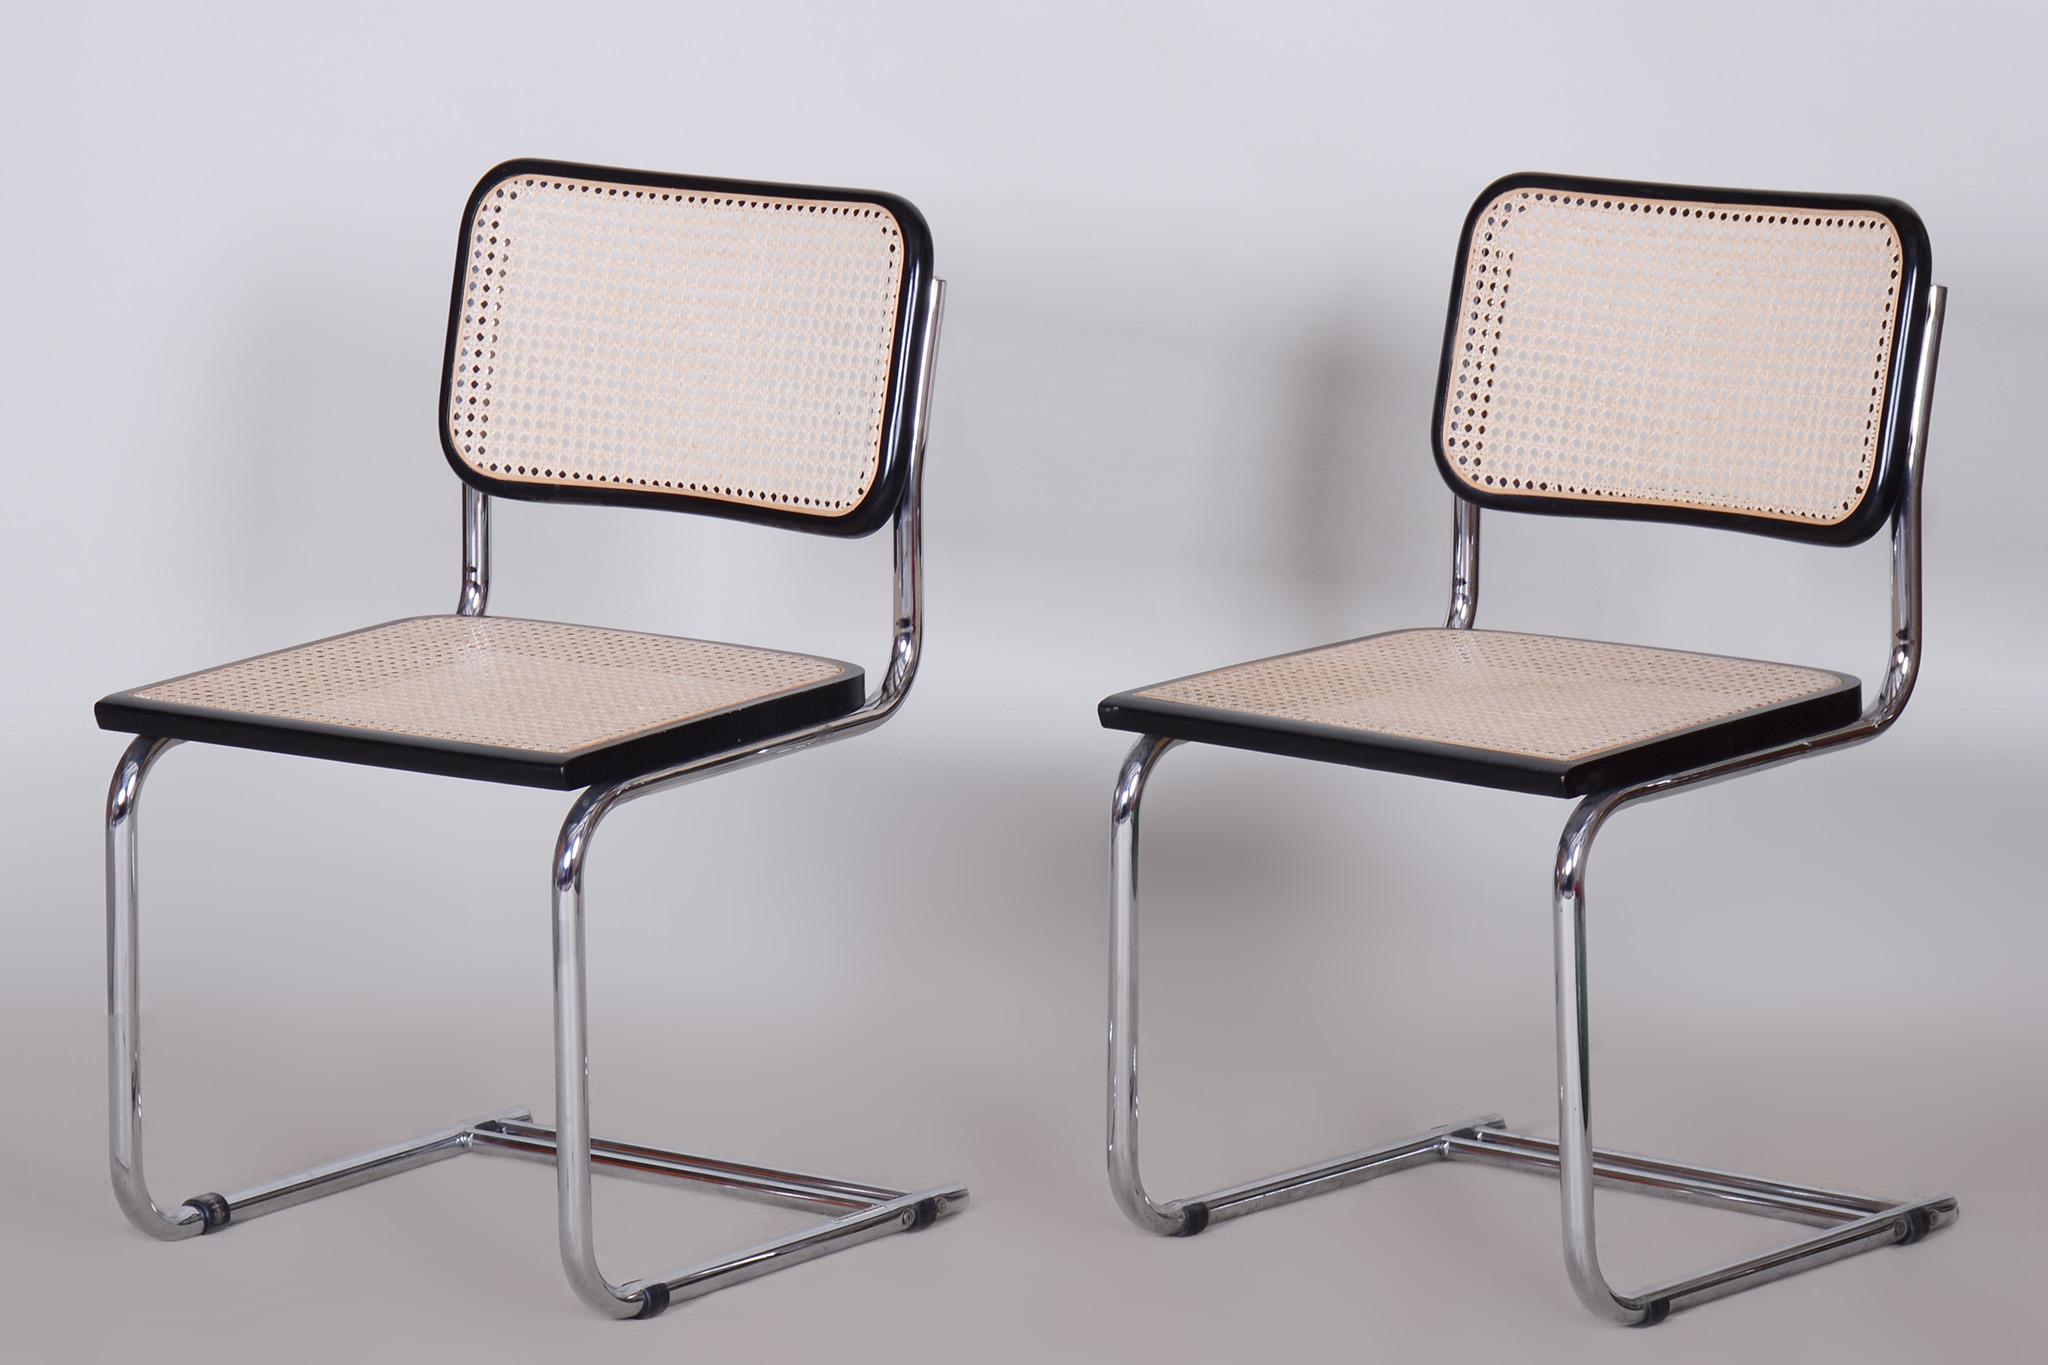 Original Pair of Bauhaus Chairs, Chrome-Plated Steel, Rattan Beech, 1960s, Italy In Good Condition For Sale In Horomerice, CZ